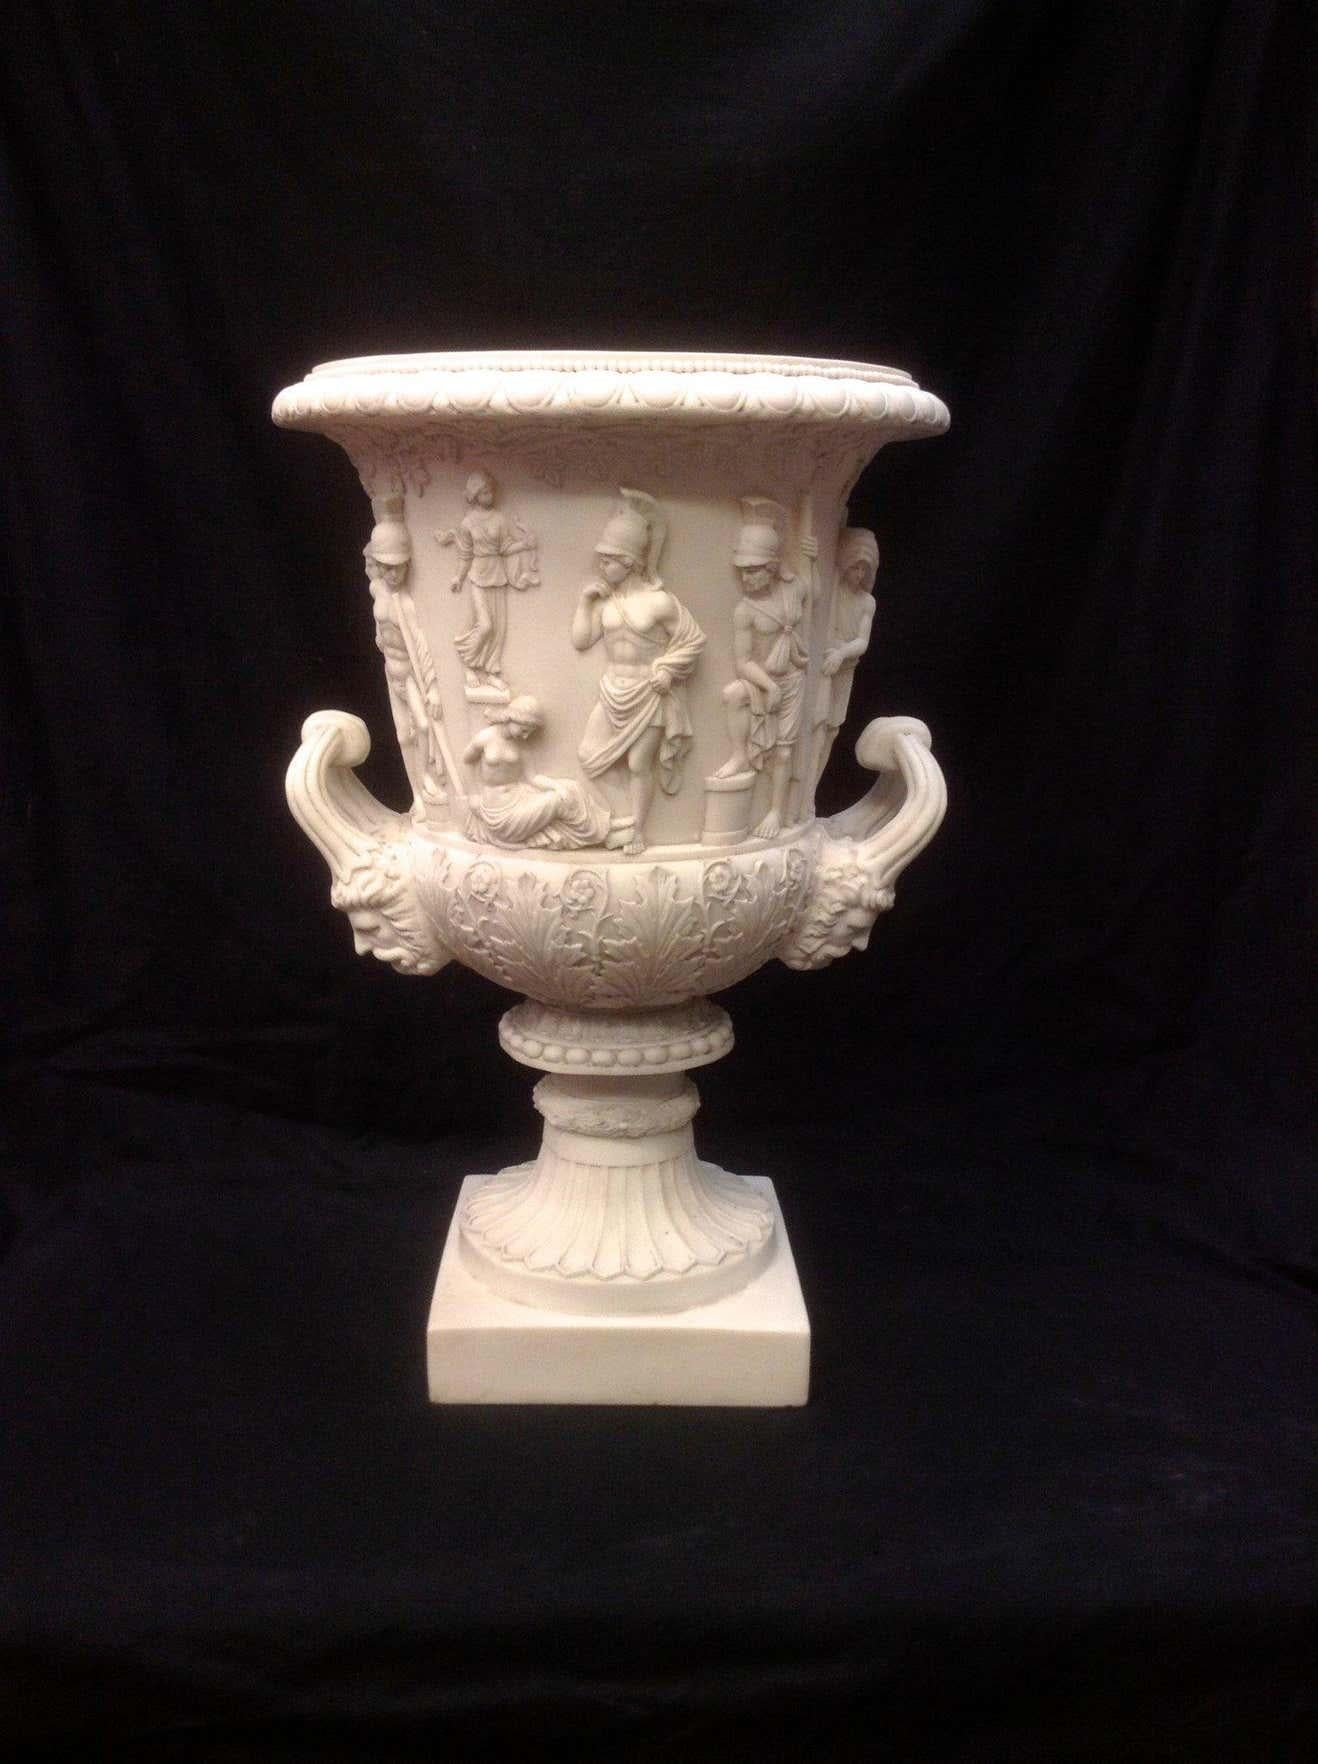 A gorgeous Medici marble vase large, 20th century.
The Medici vase.

The Medici vase, a true timeless piece of marble art, originally made in Athens in the second half of the first century AD, as decoration for the Roman market.

The vase has